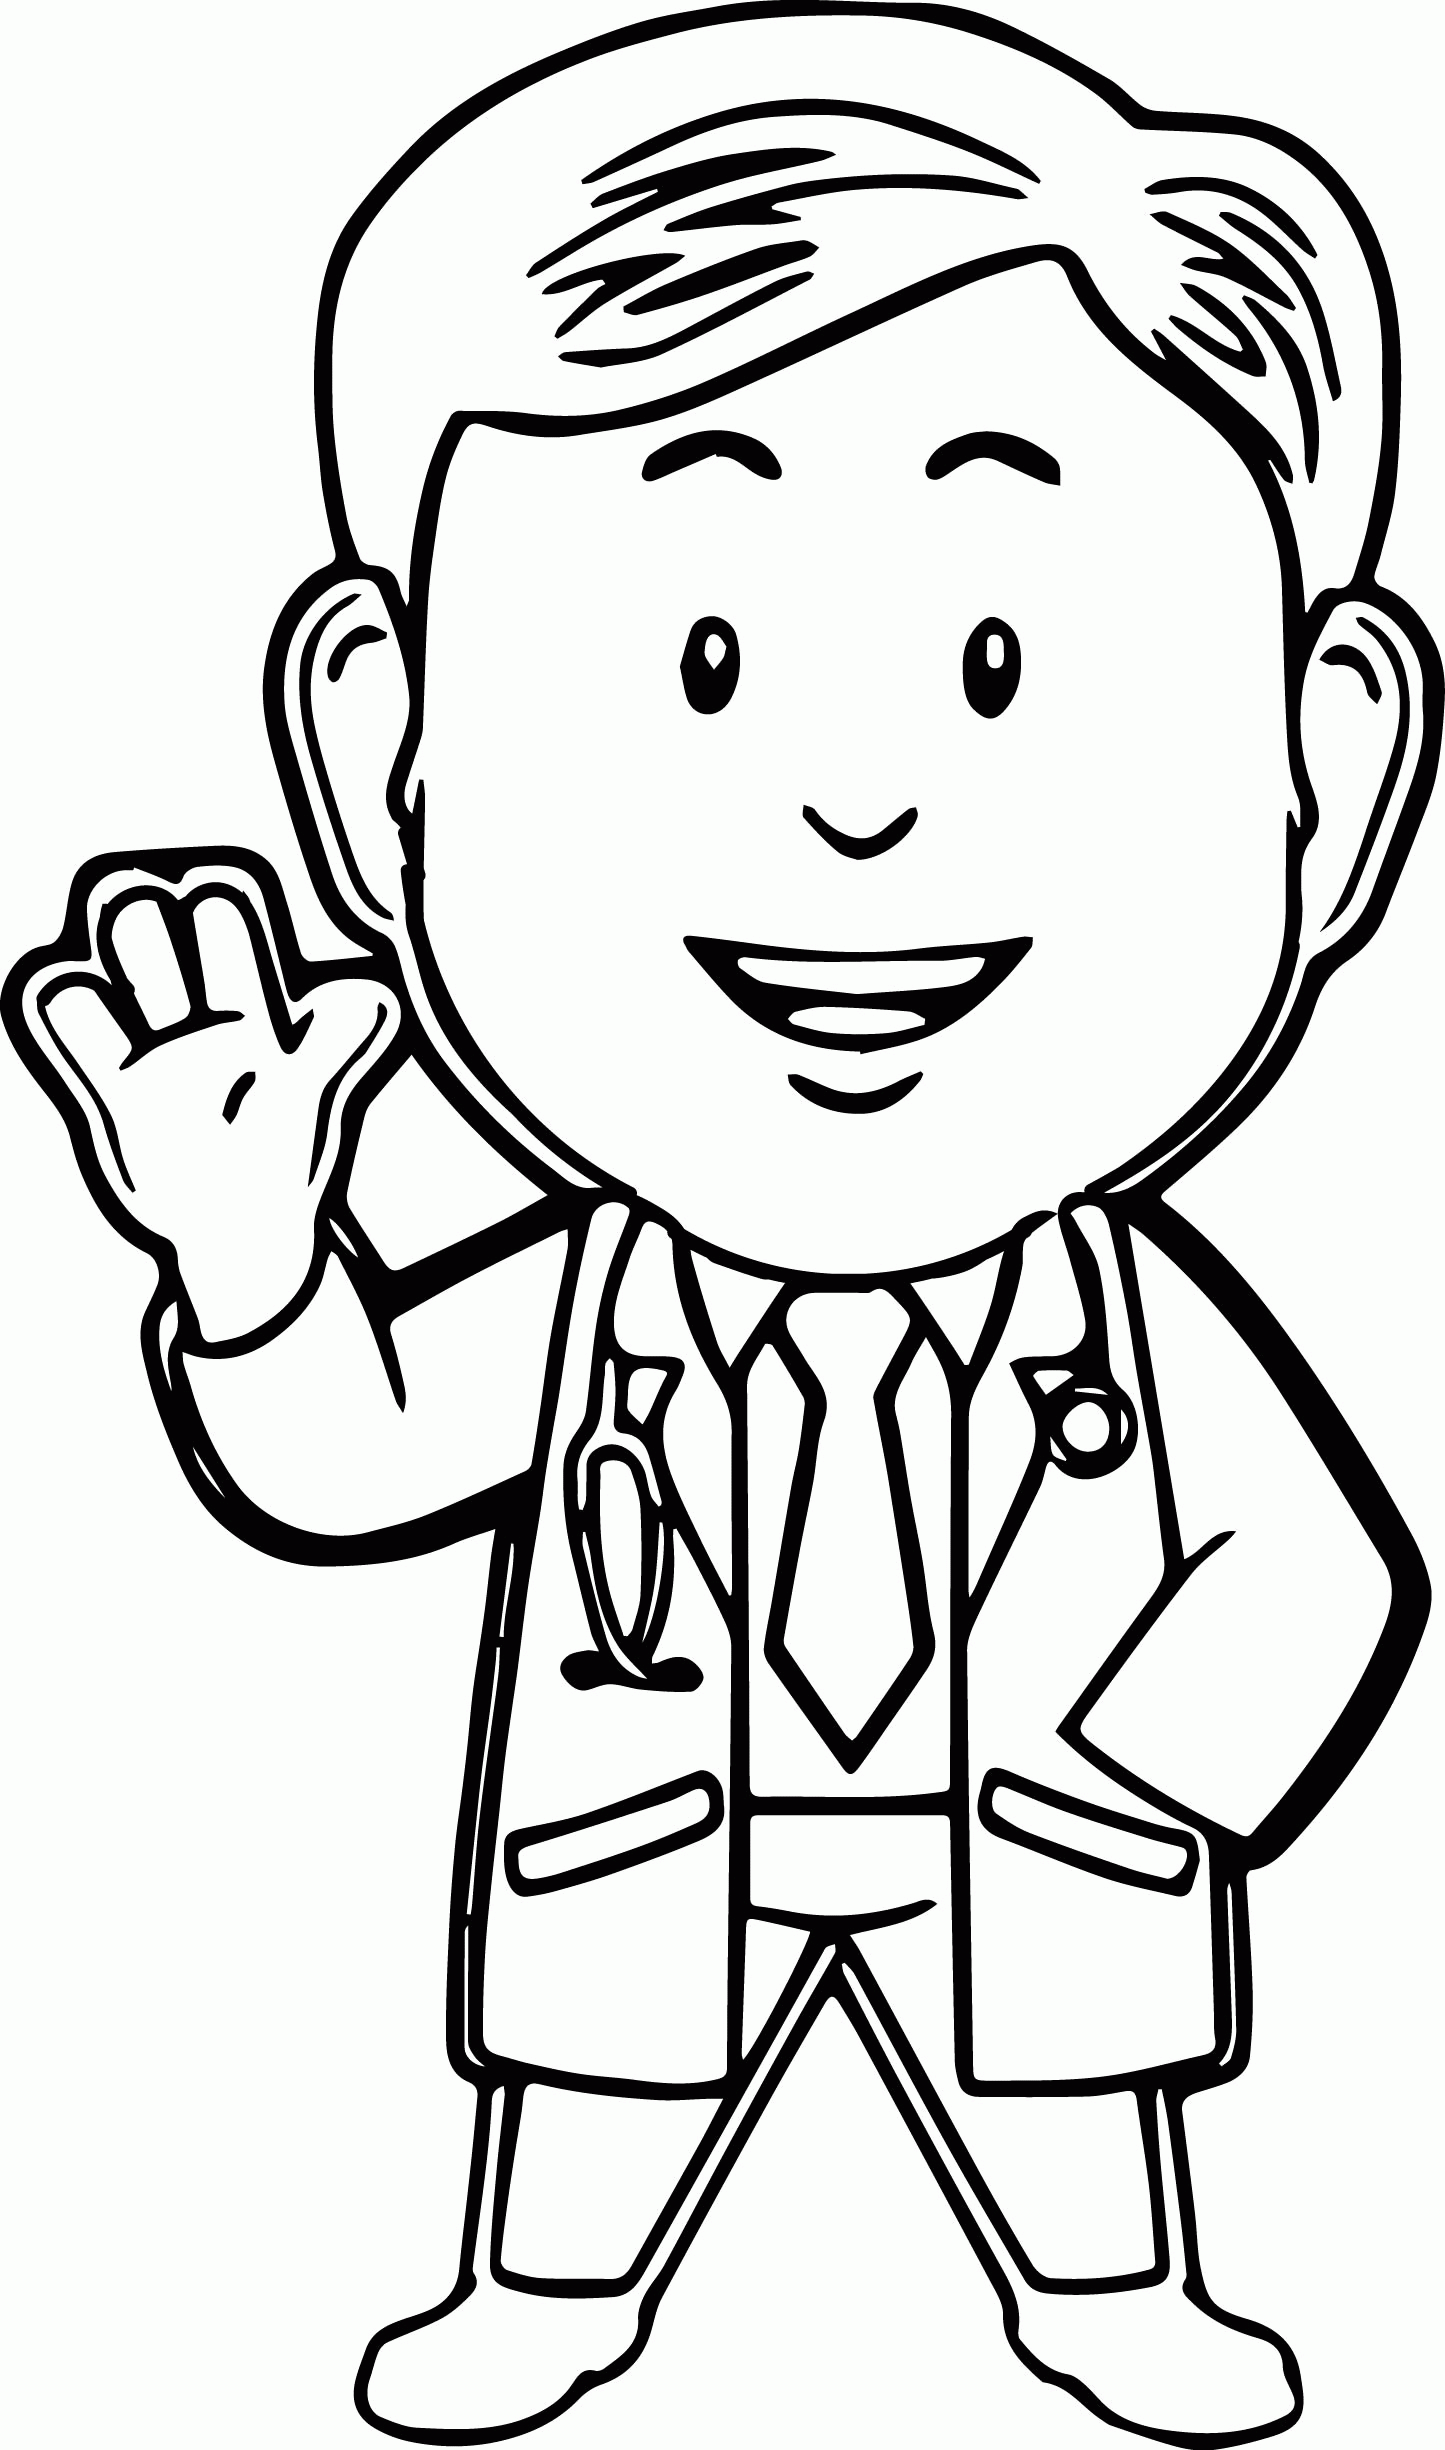 Woman Doctor Coloring Pages - Coloring Home